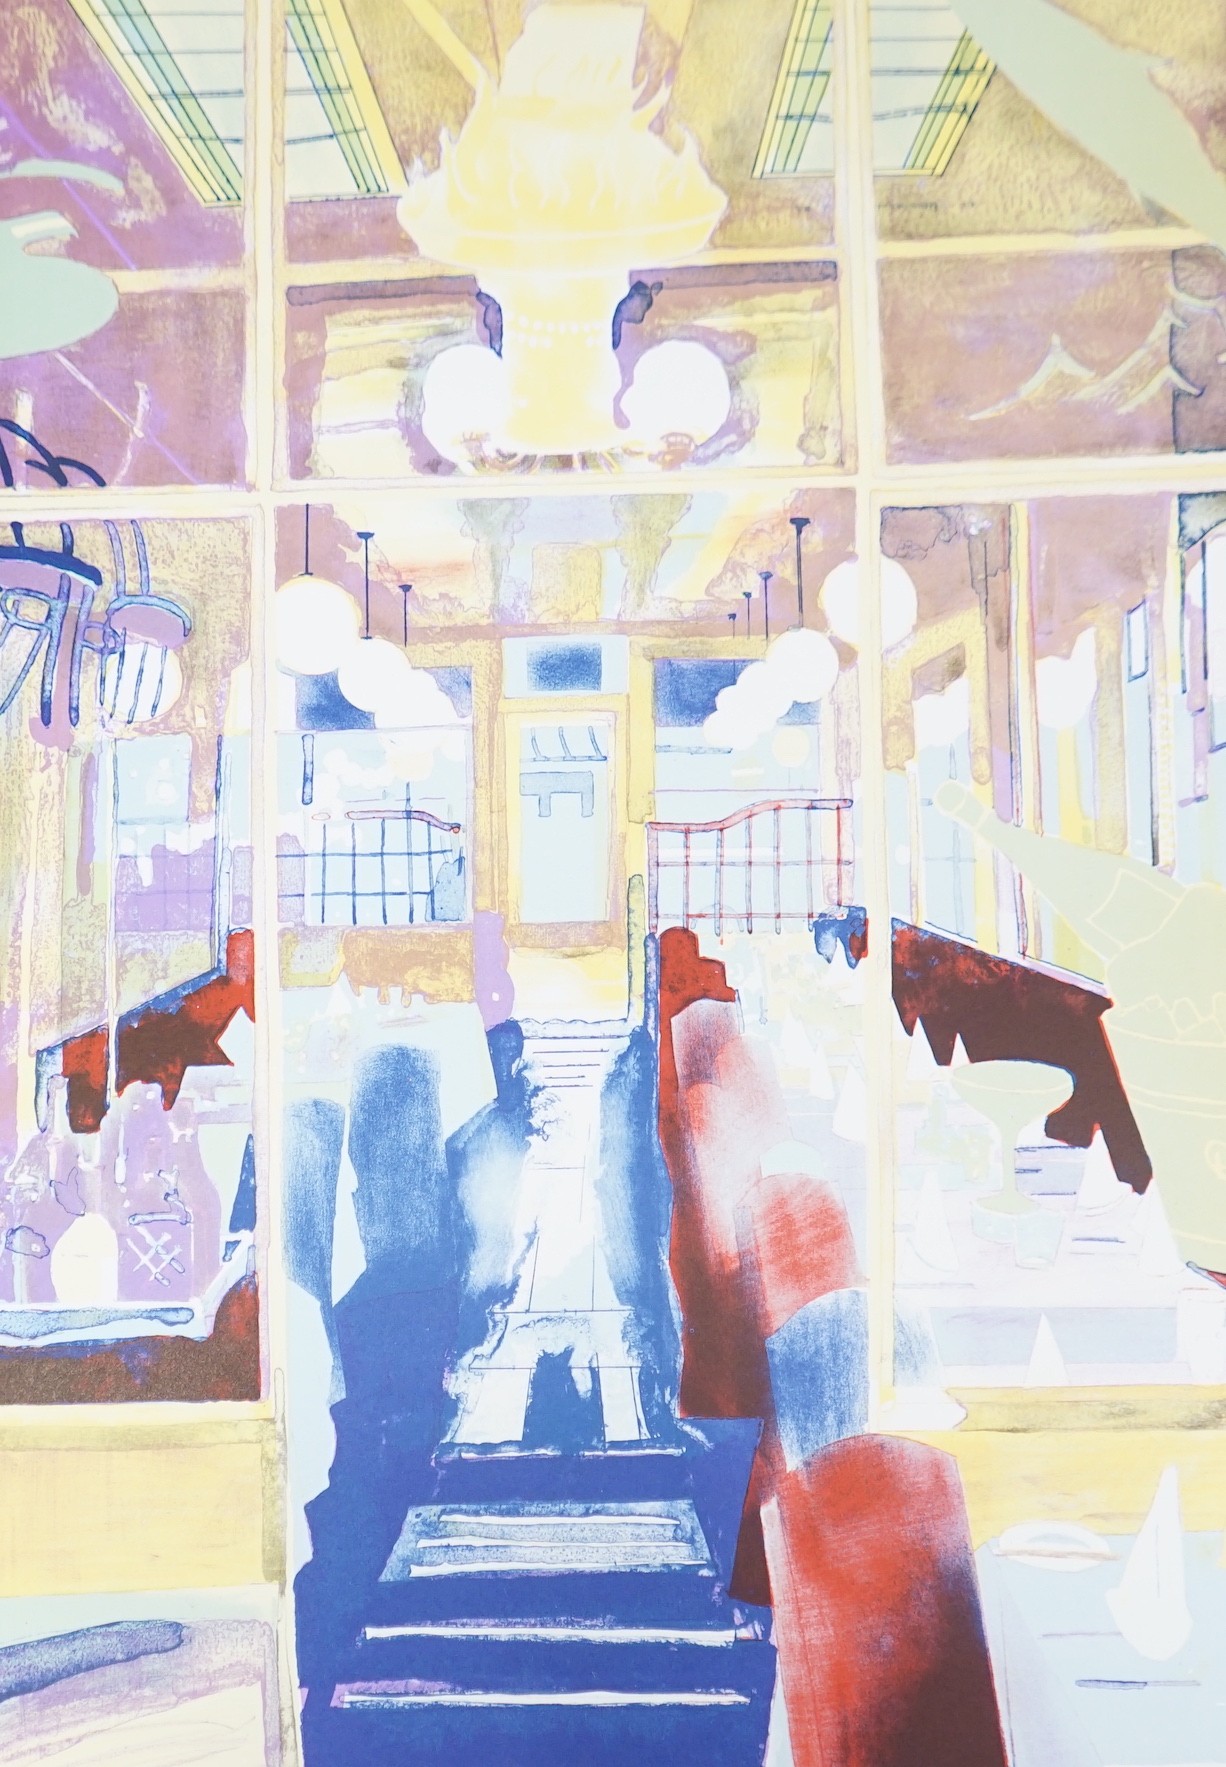 Glynn Boyd Harte (1948-2003), three limited edition prints, Café interior, Pollocks Toy Museum and Tool Shop Window, all signed in pencil and numbered from editions of 150/160, largest overall 71 x 55cm, unframed